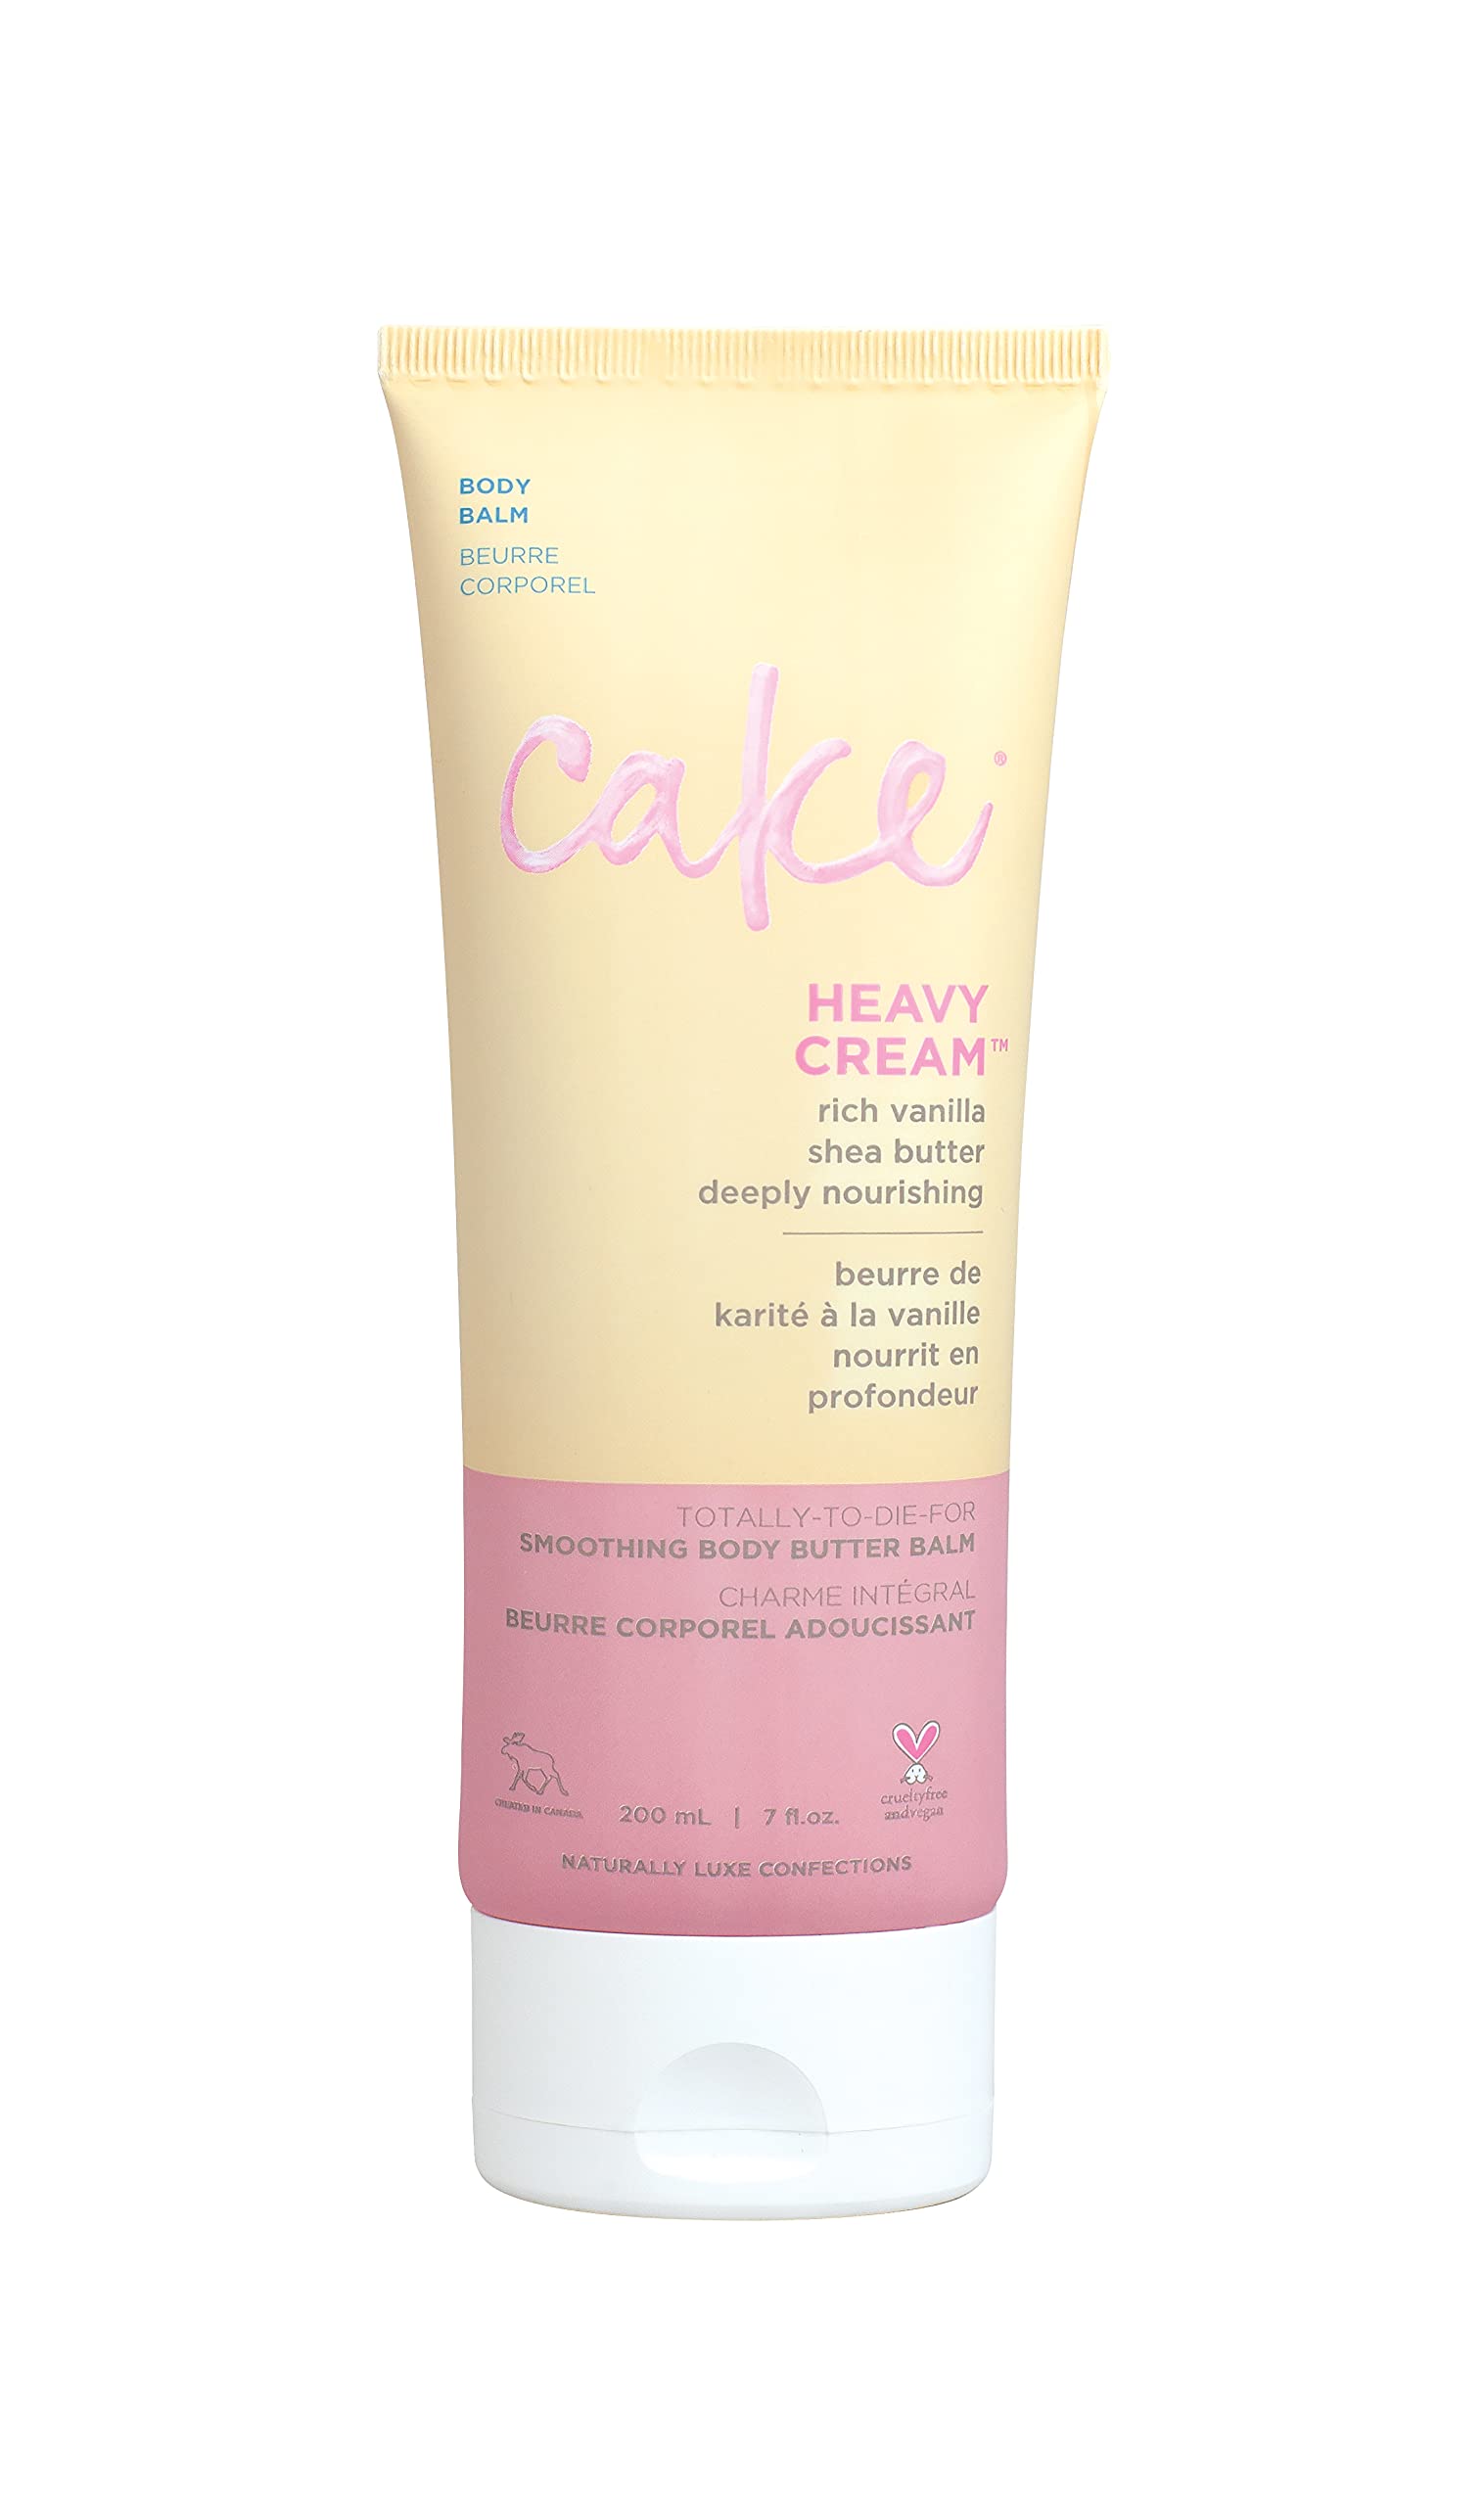 Cake Beauty Vegan Body Cream Body Lotion for Dry Skin - Oat Milk, Shea Butter & Marshmallow Root - Sulfate Free, Paraben Free & Cruelty Free Body Butter Balm Lotion & Moisturizer, 7 Ounce (Pack of 1)